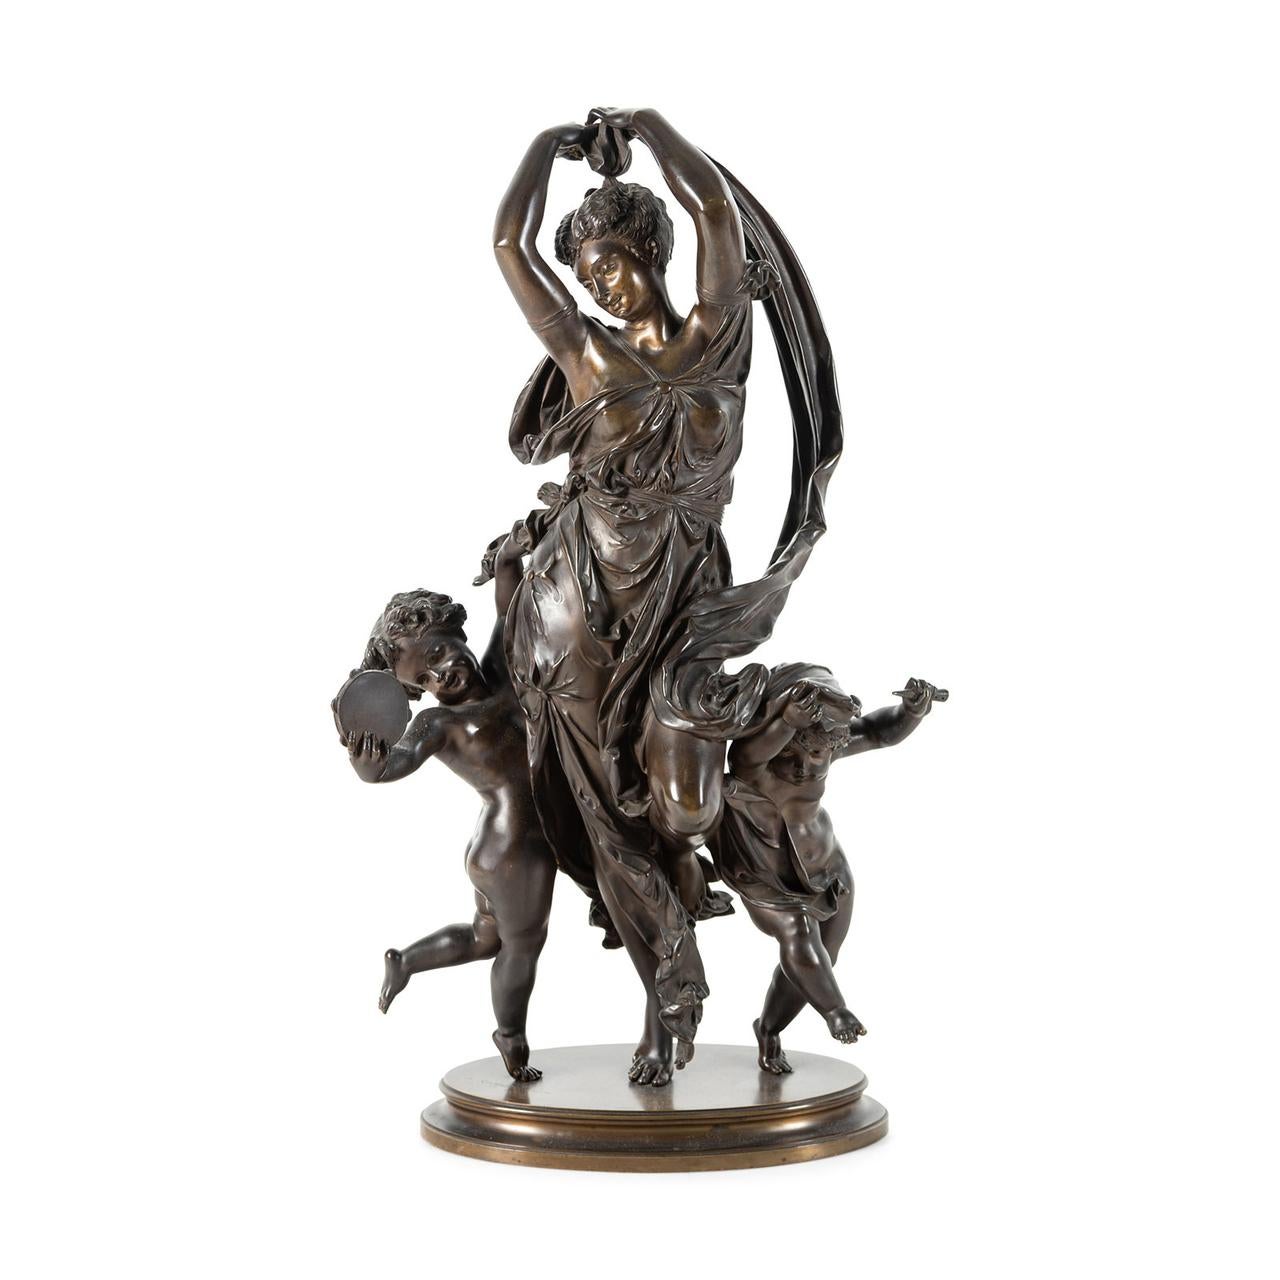 Auguste Joseph Carrier Figurative Sculpture - A Fine Quality Patinated Bronze Group of Maenad and Cherubs Dancing